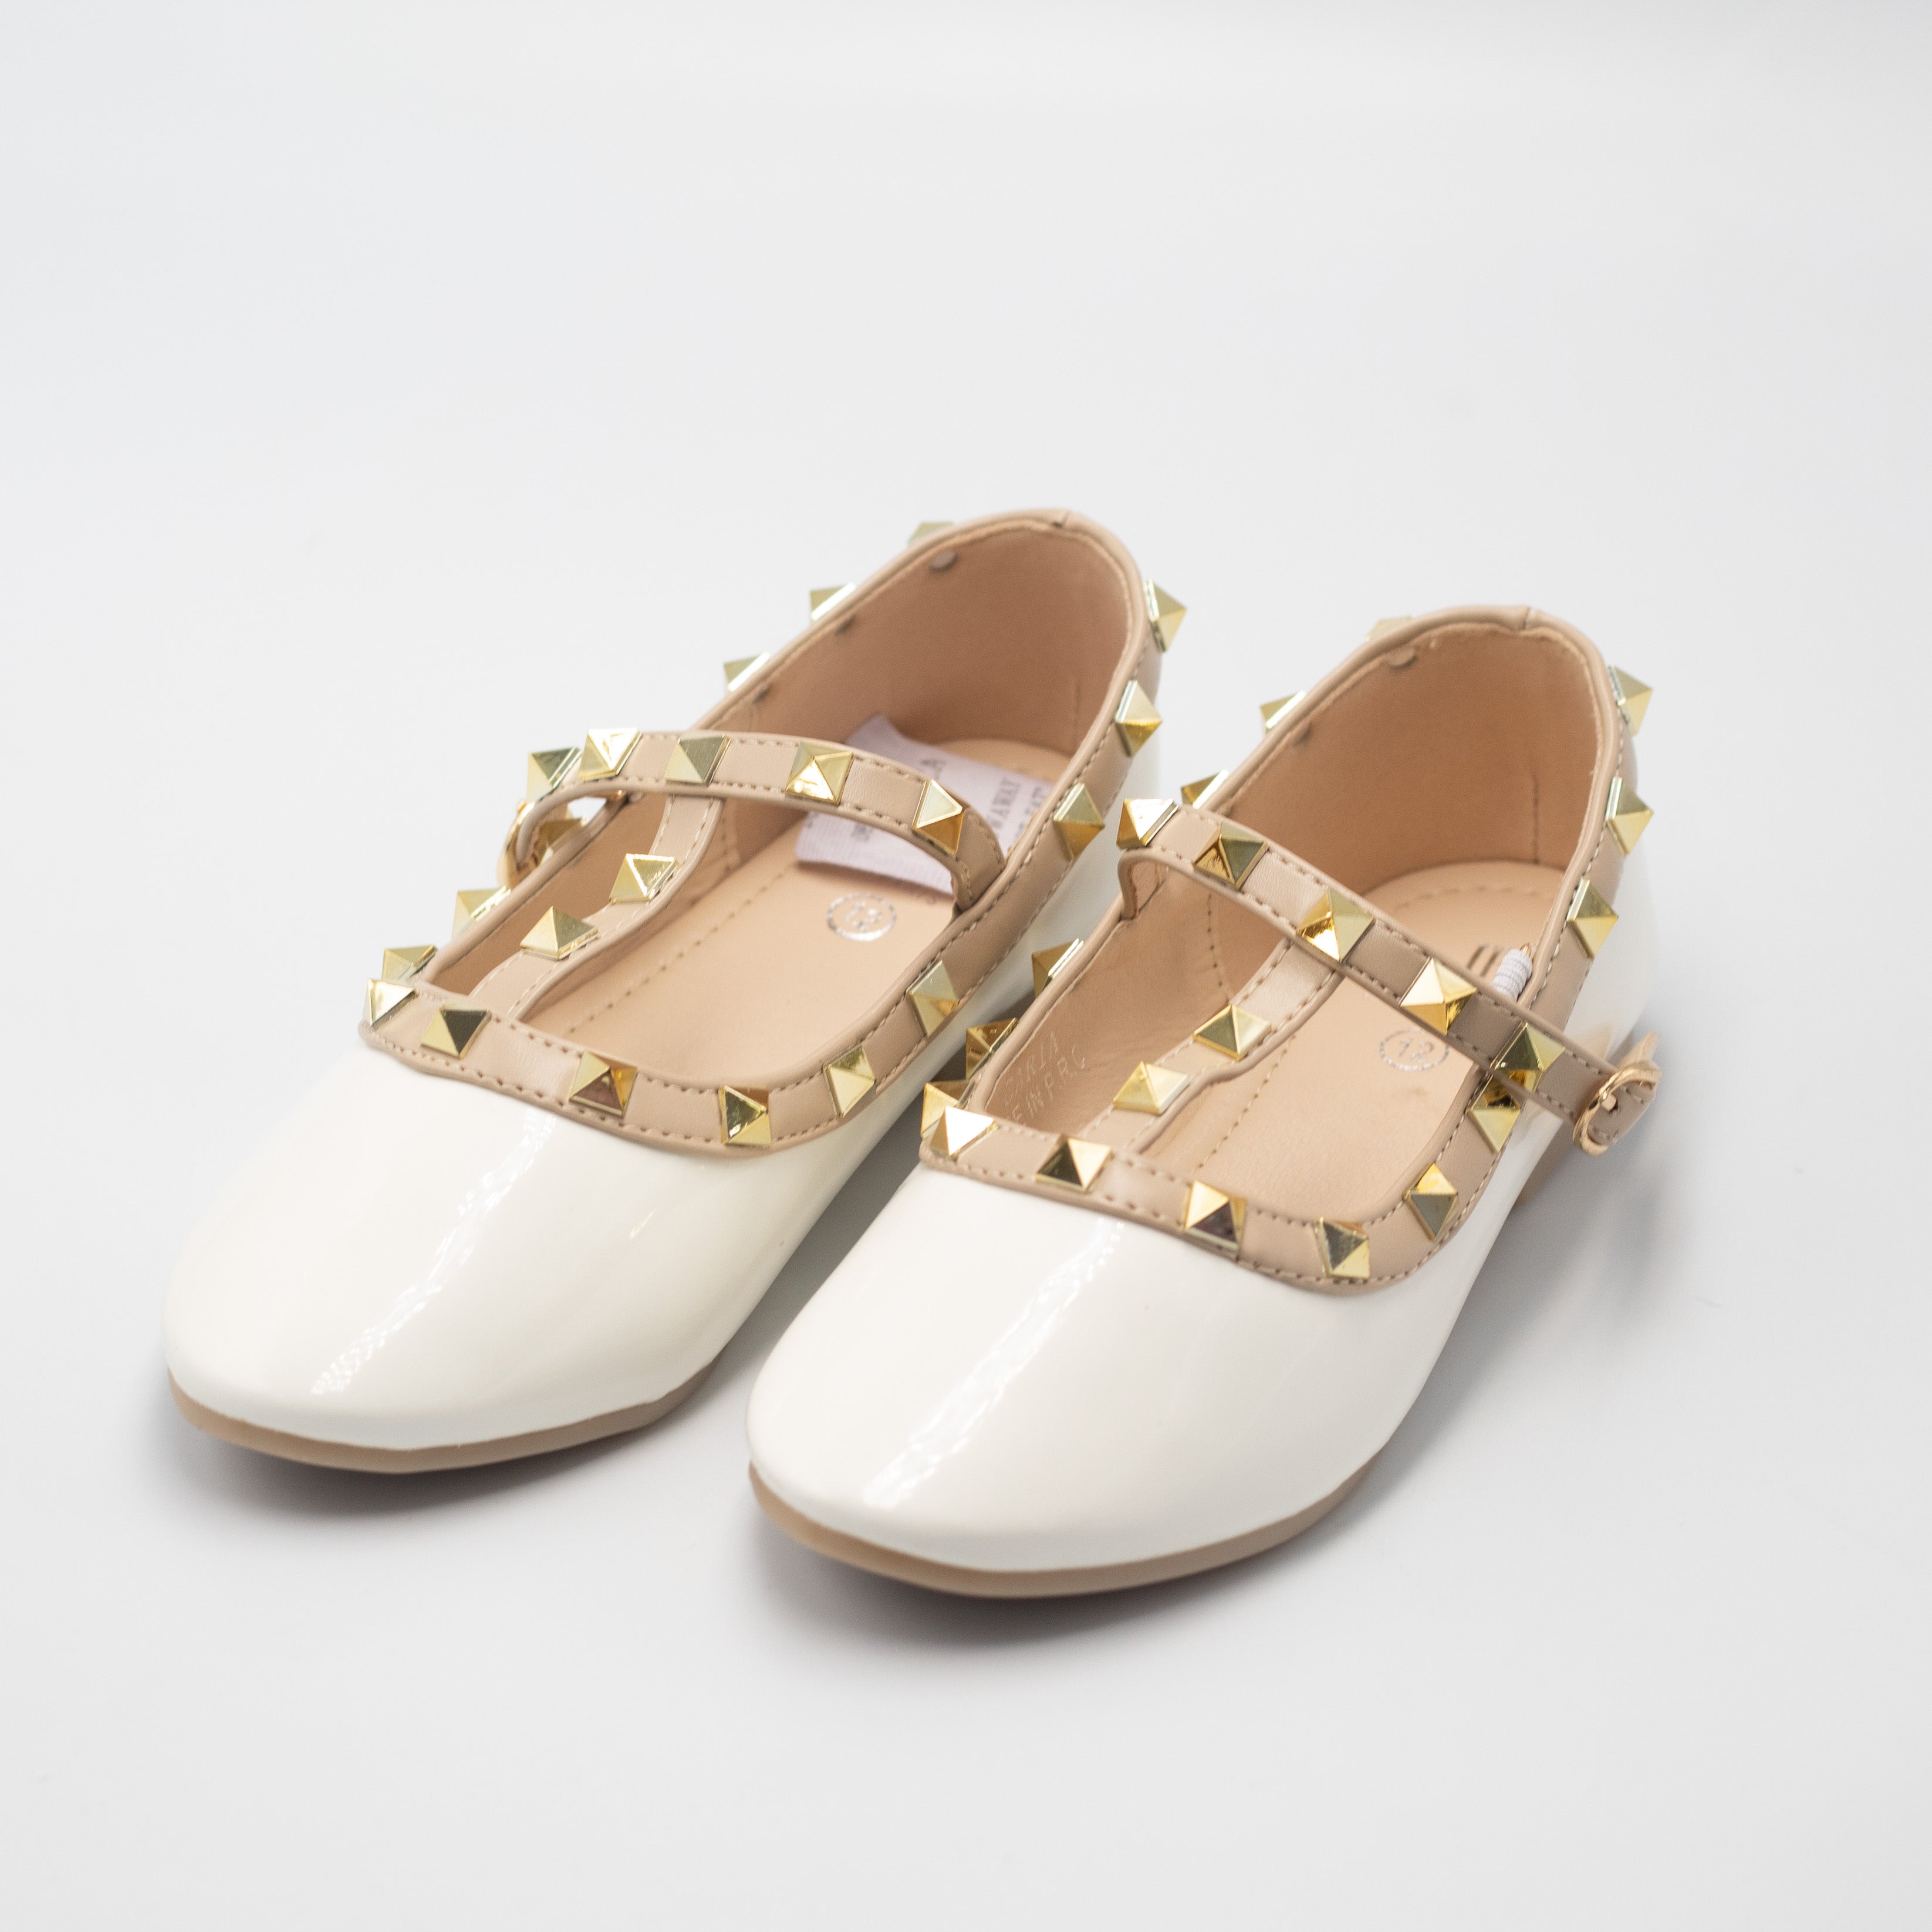 White girls dress pump with studded detail caria